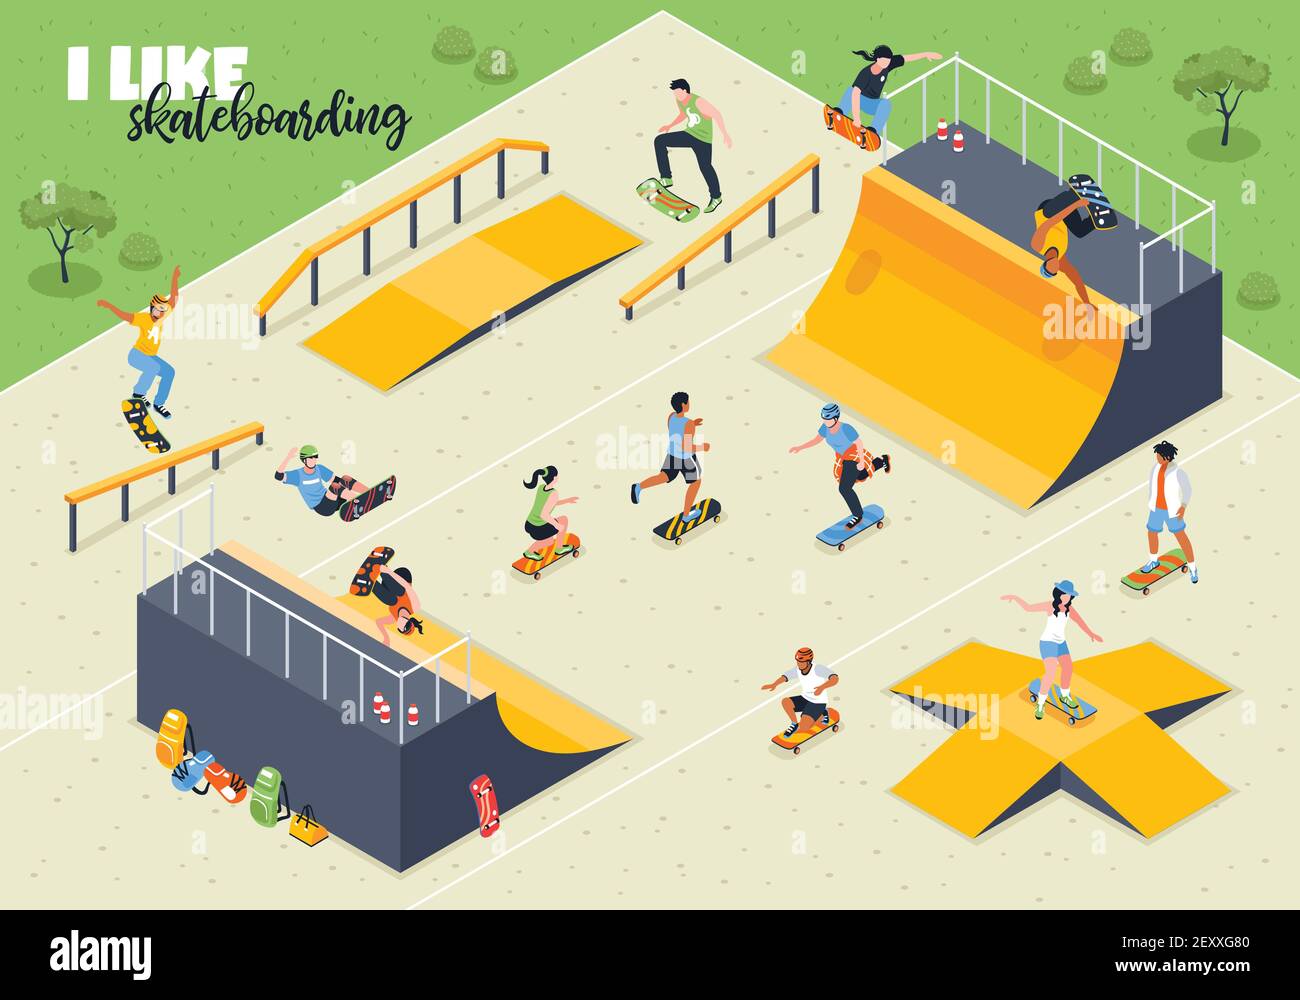 Young athletes during skateboard riding on sport ground with ramps isometric horizontal vector illustration Stock Vector